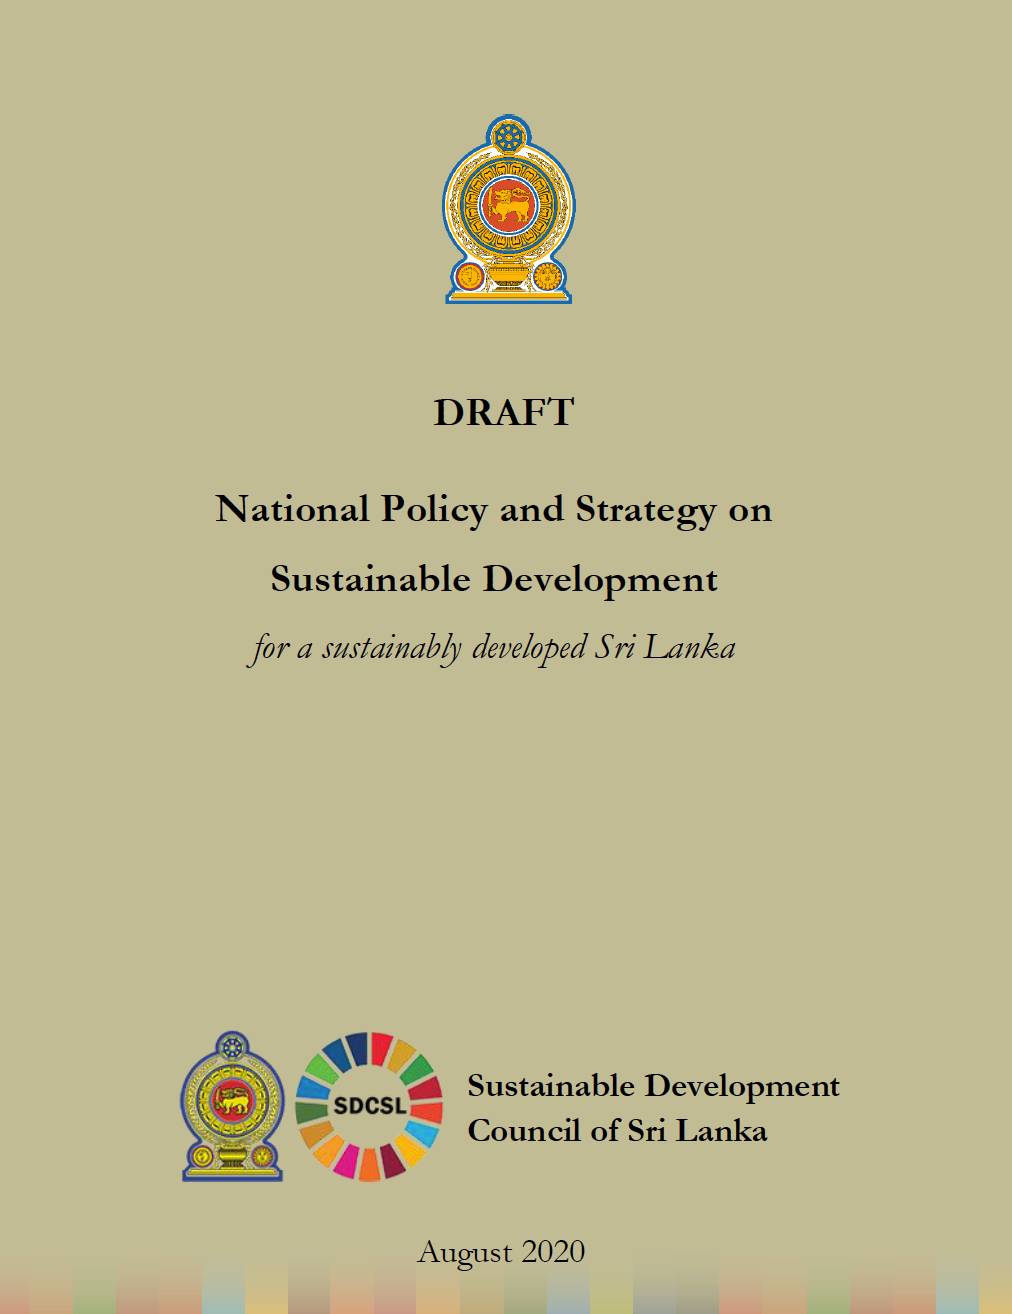 Sri Lanka National Policy and Strategy on Sustainable Development (Draft)